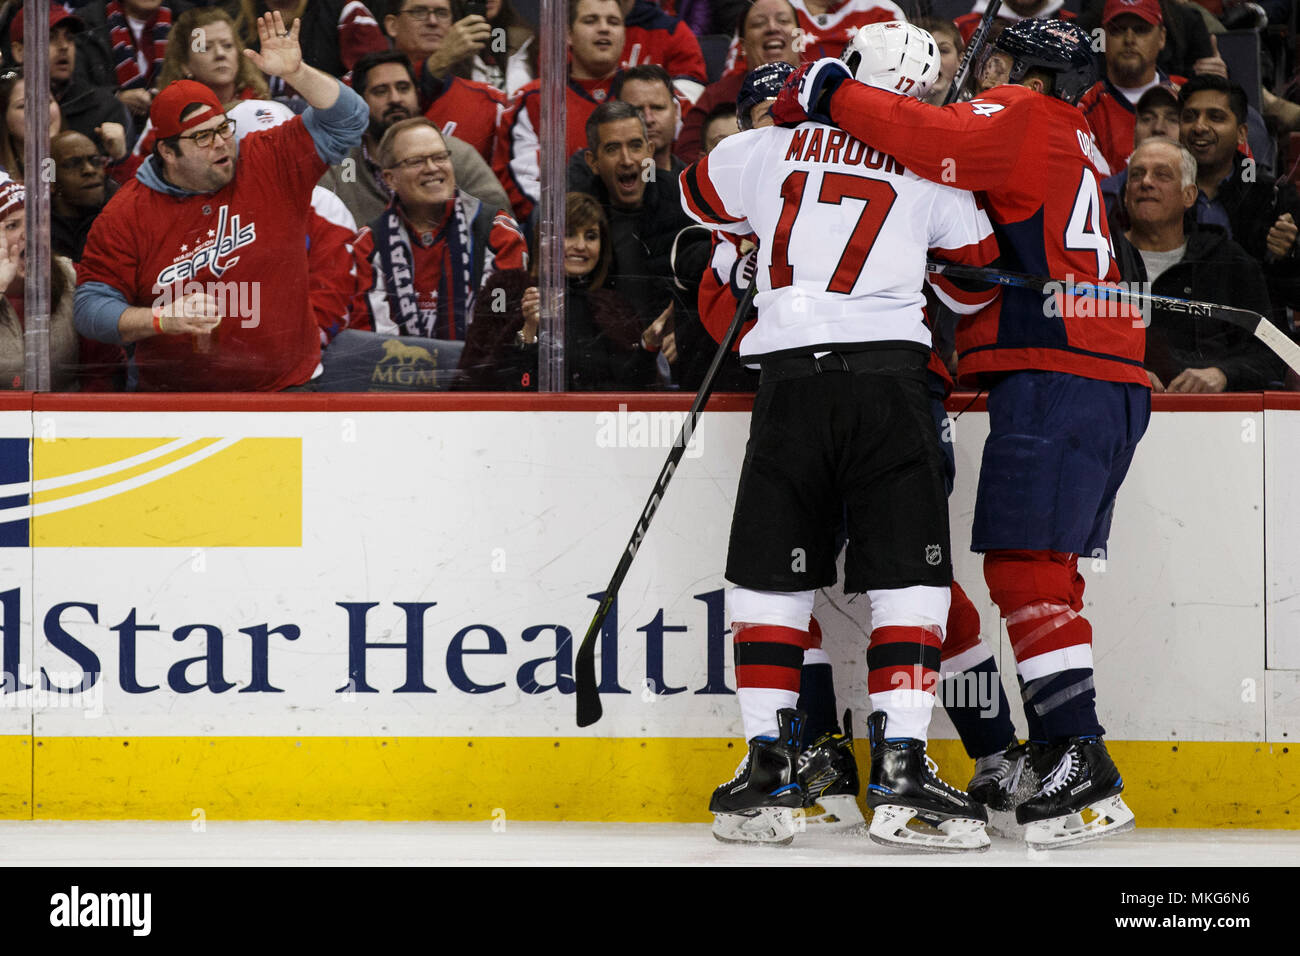 For Capital coach, it's a matter of trust in Brooks Orpik - Sports